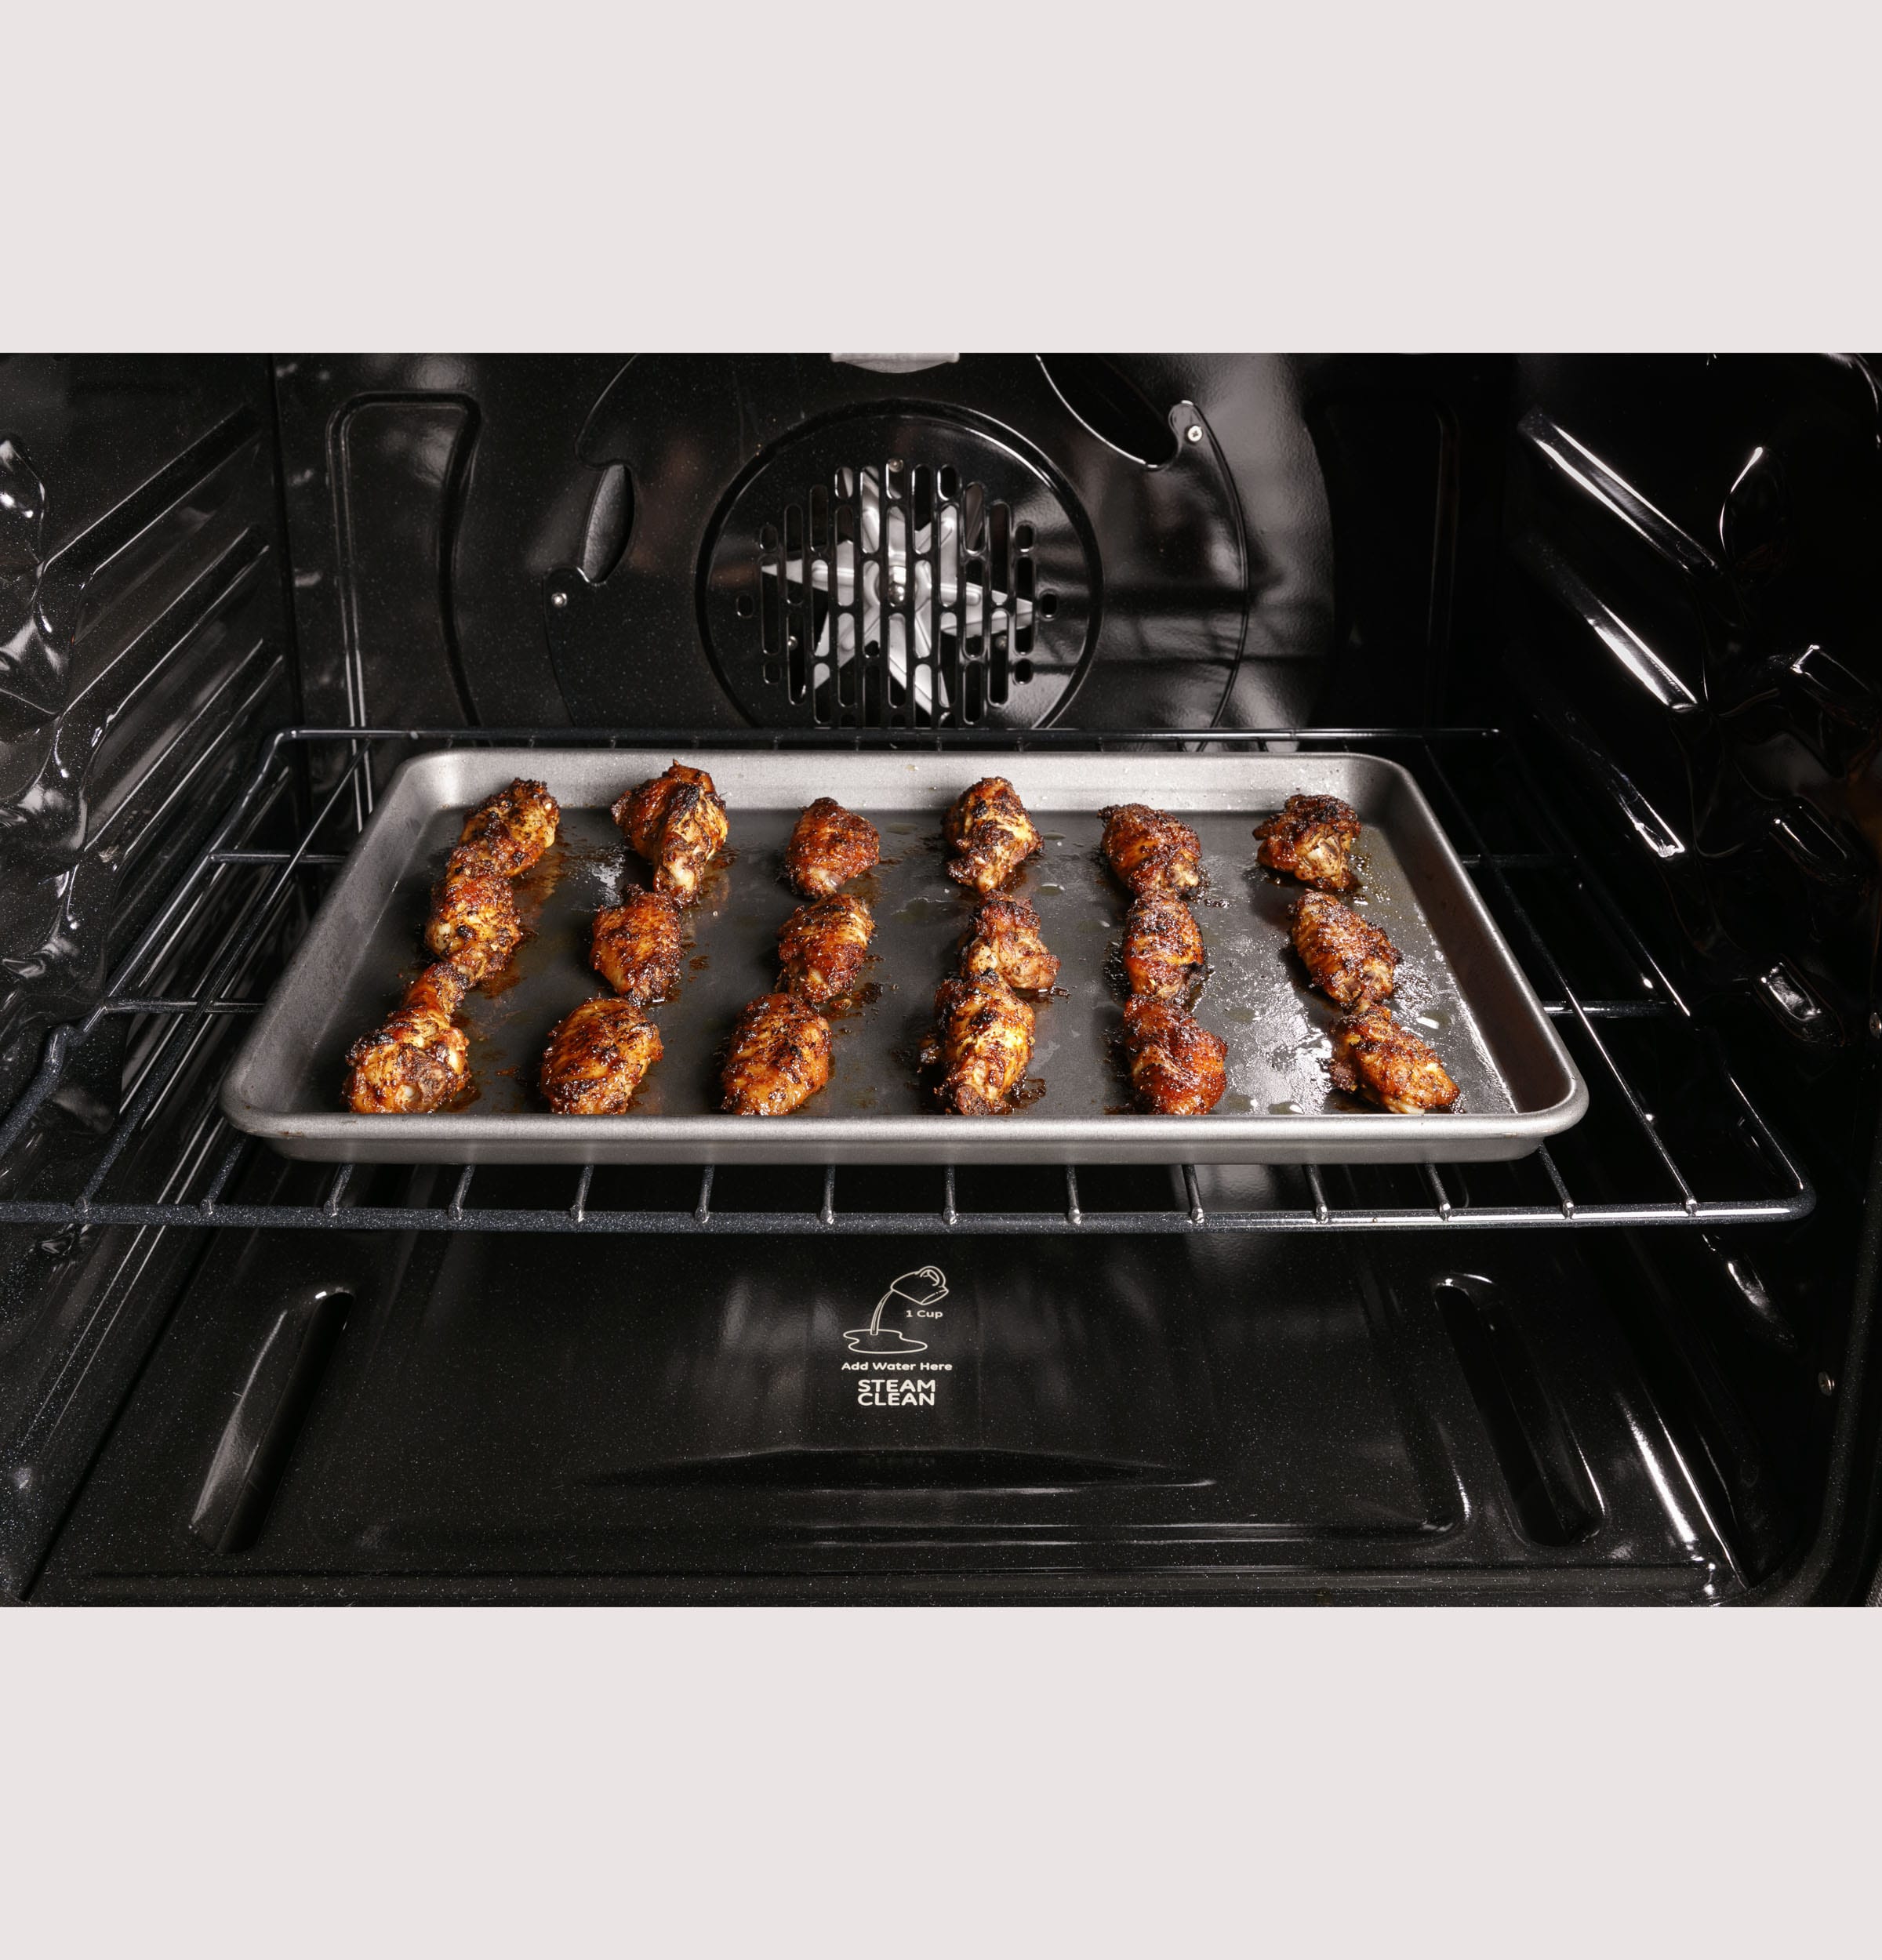 GE Profile PGB965YPFS 30 inch Stainless Steel GAS Convection Double Oven Freestanding Range